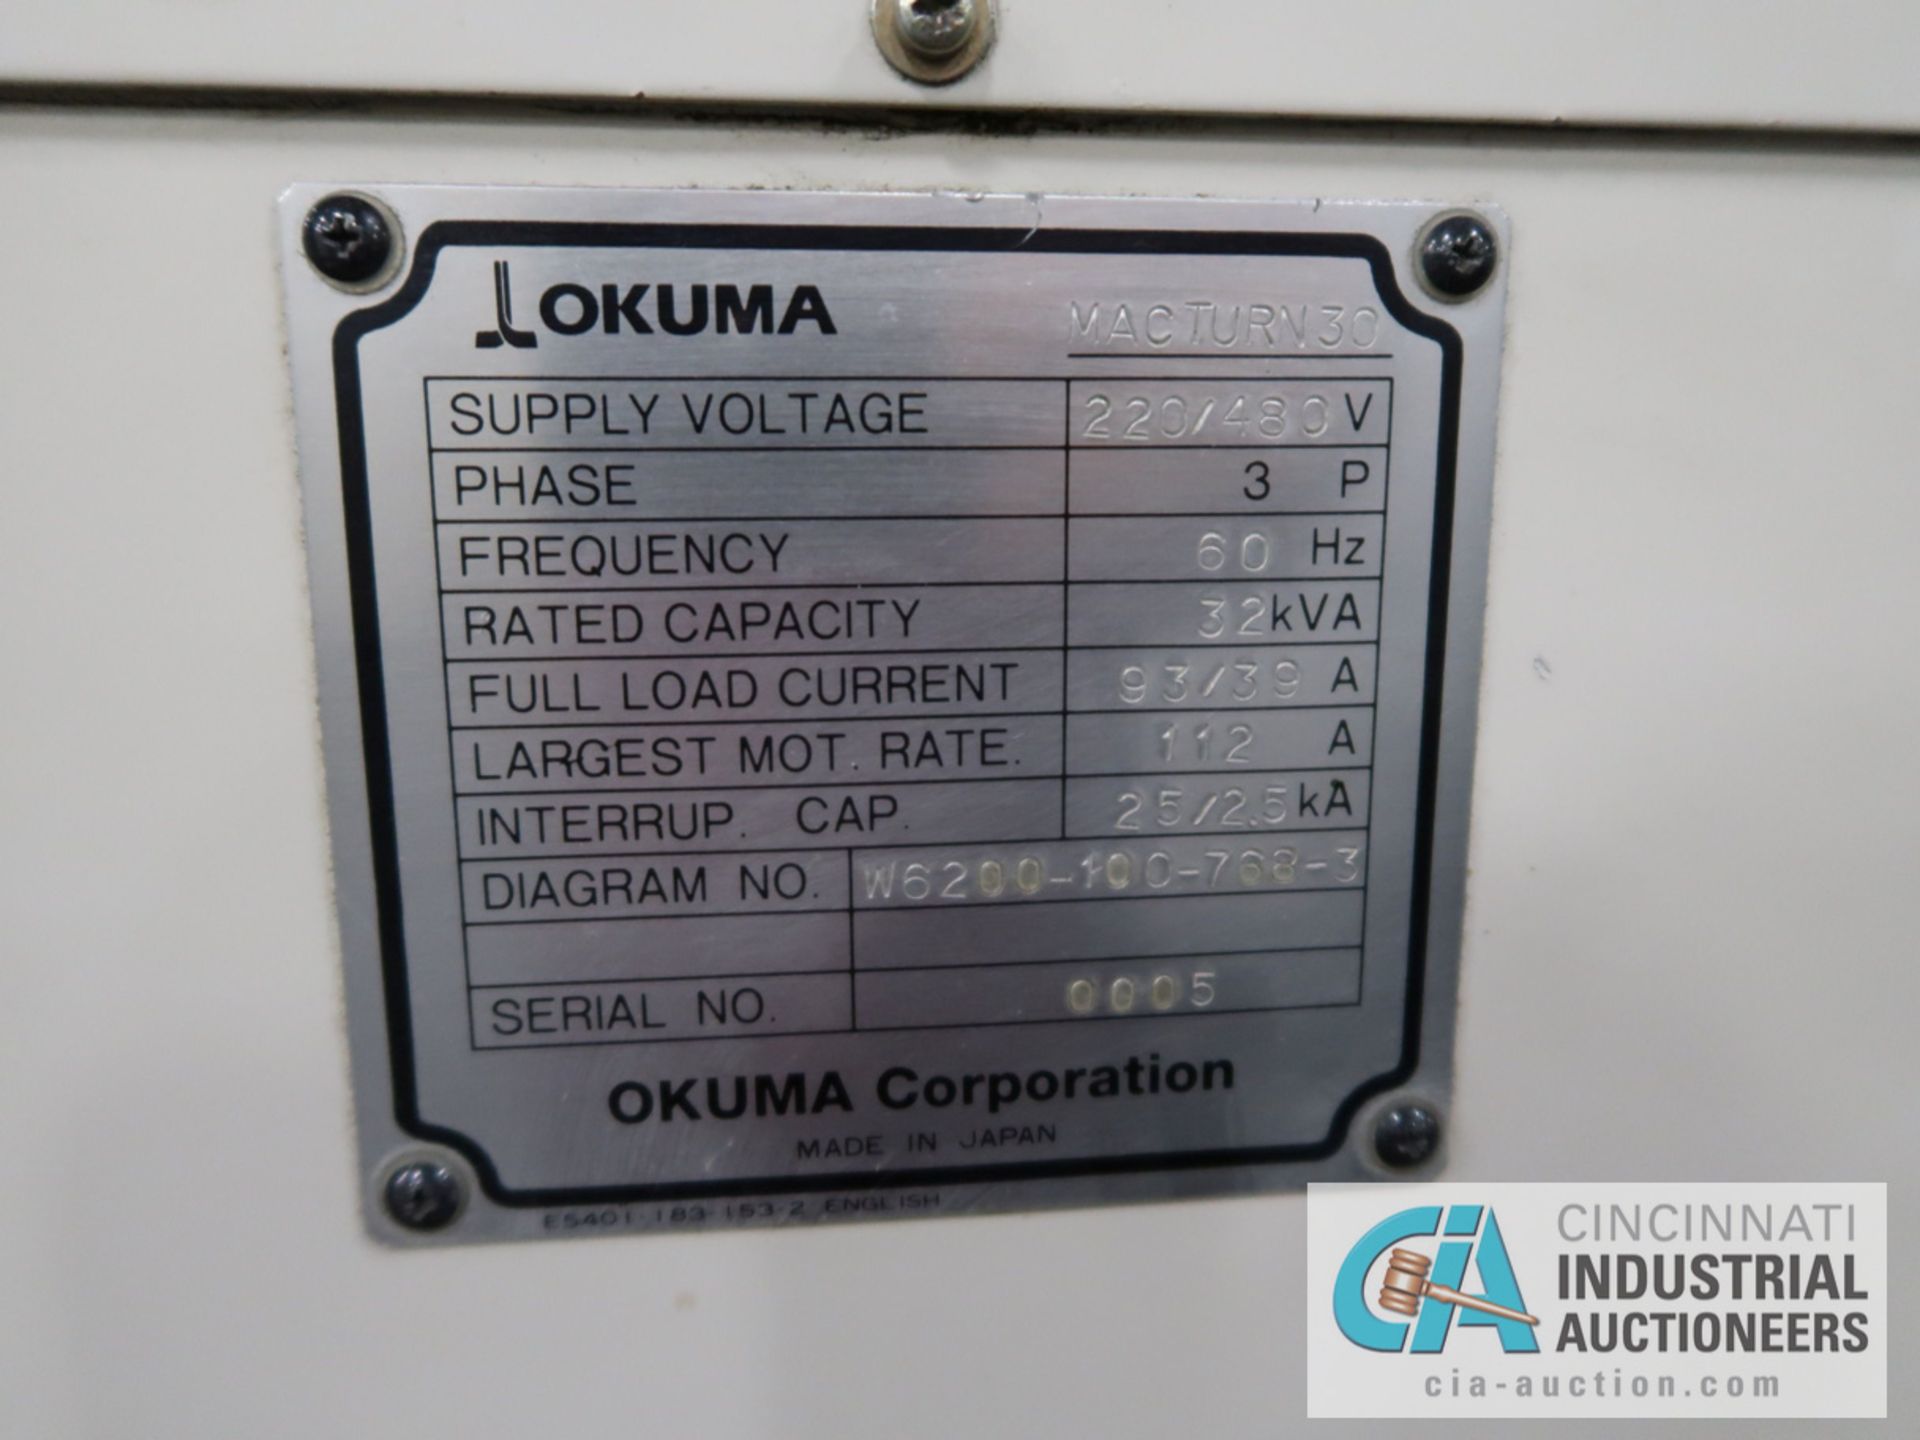 OKUMA MODEL MACTURN-30 MULTI-AXIS CNC TURNING CENTER; 21" MAX. SWING, 48" CENTERS, 12" 3-JAW CHUCK - Image 13 of 13